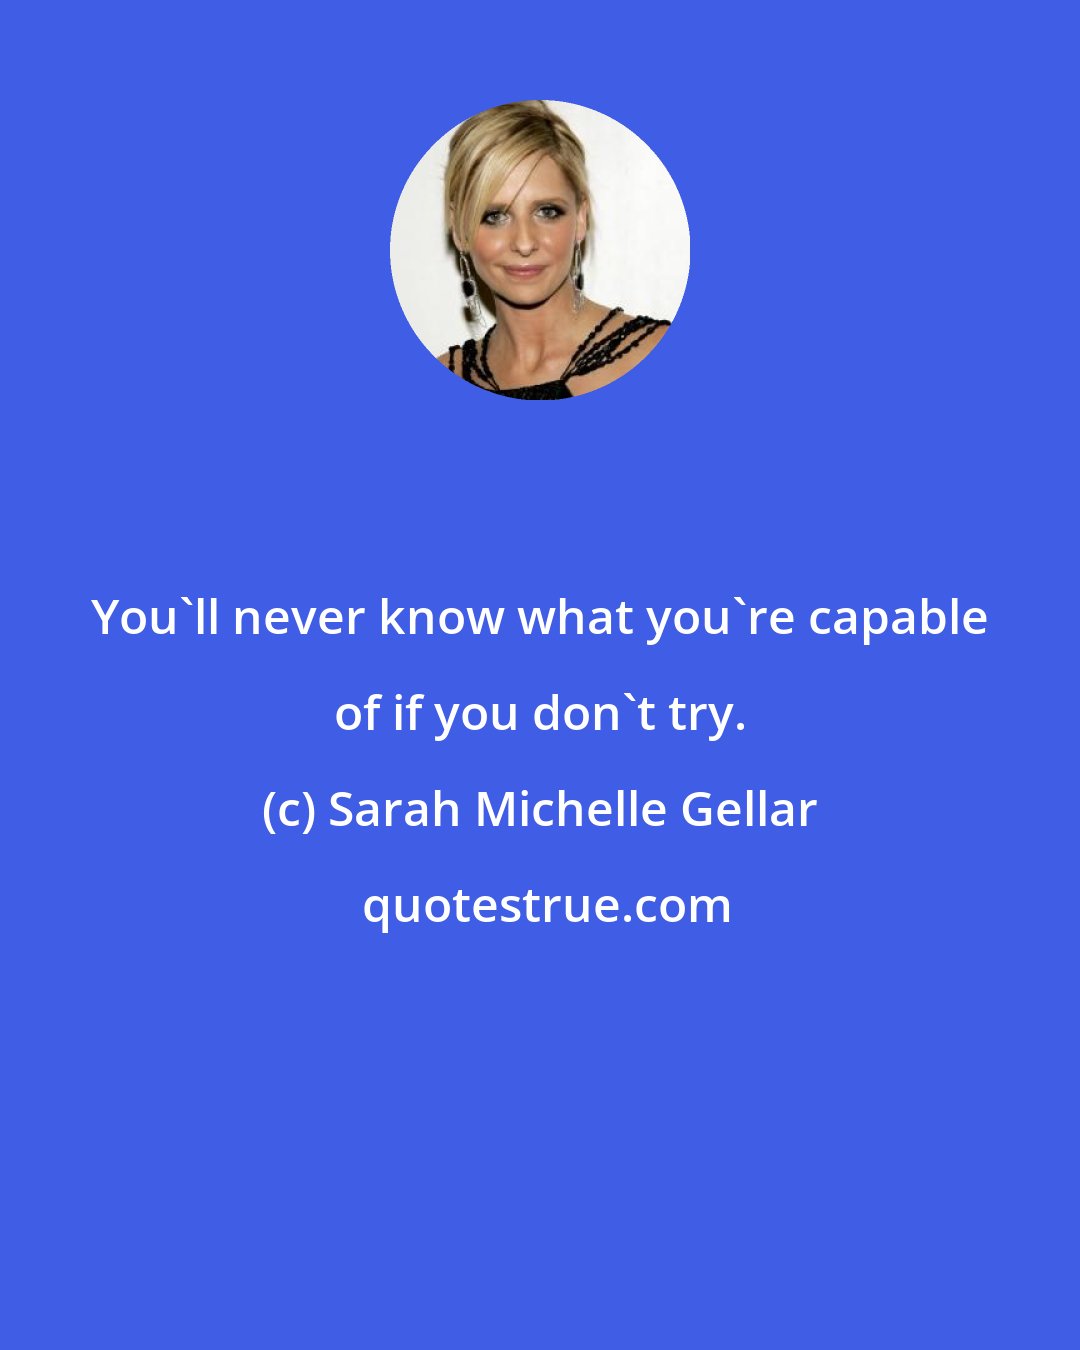 Sarah Michelle Gellar: You'll never know what you're capable of if you don't try.